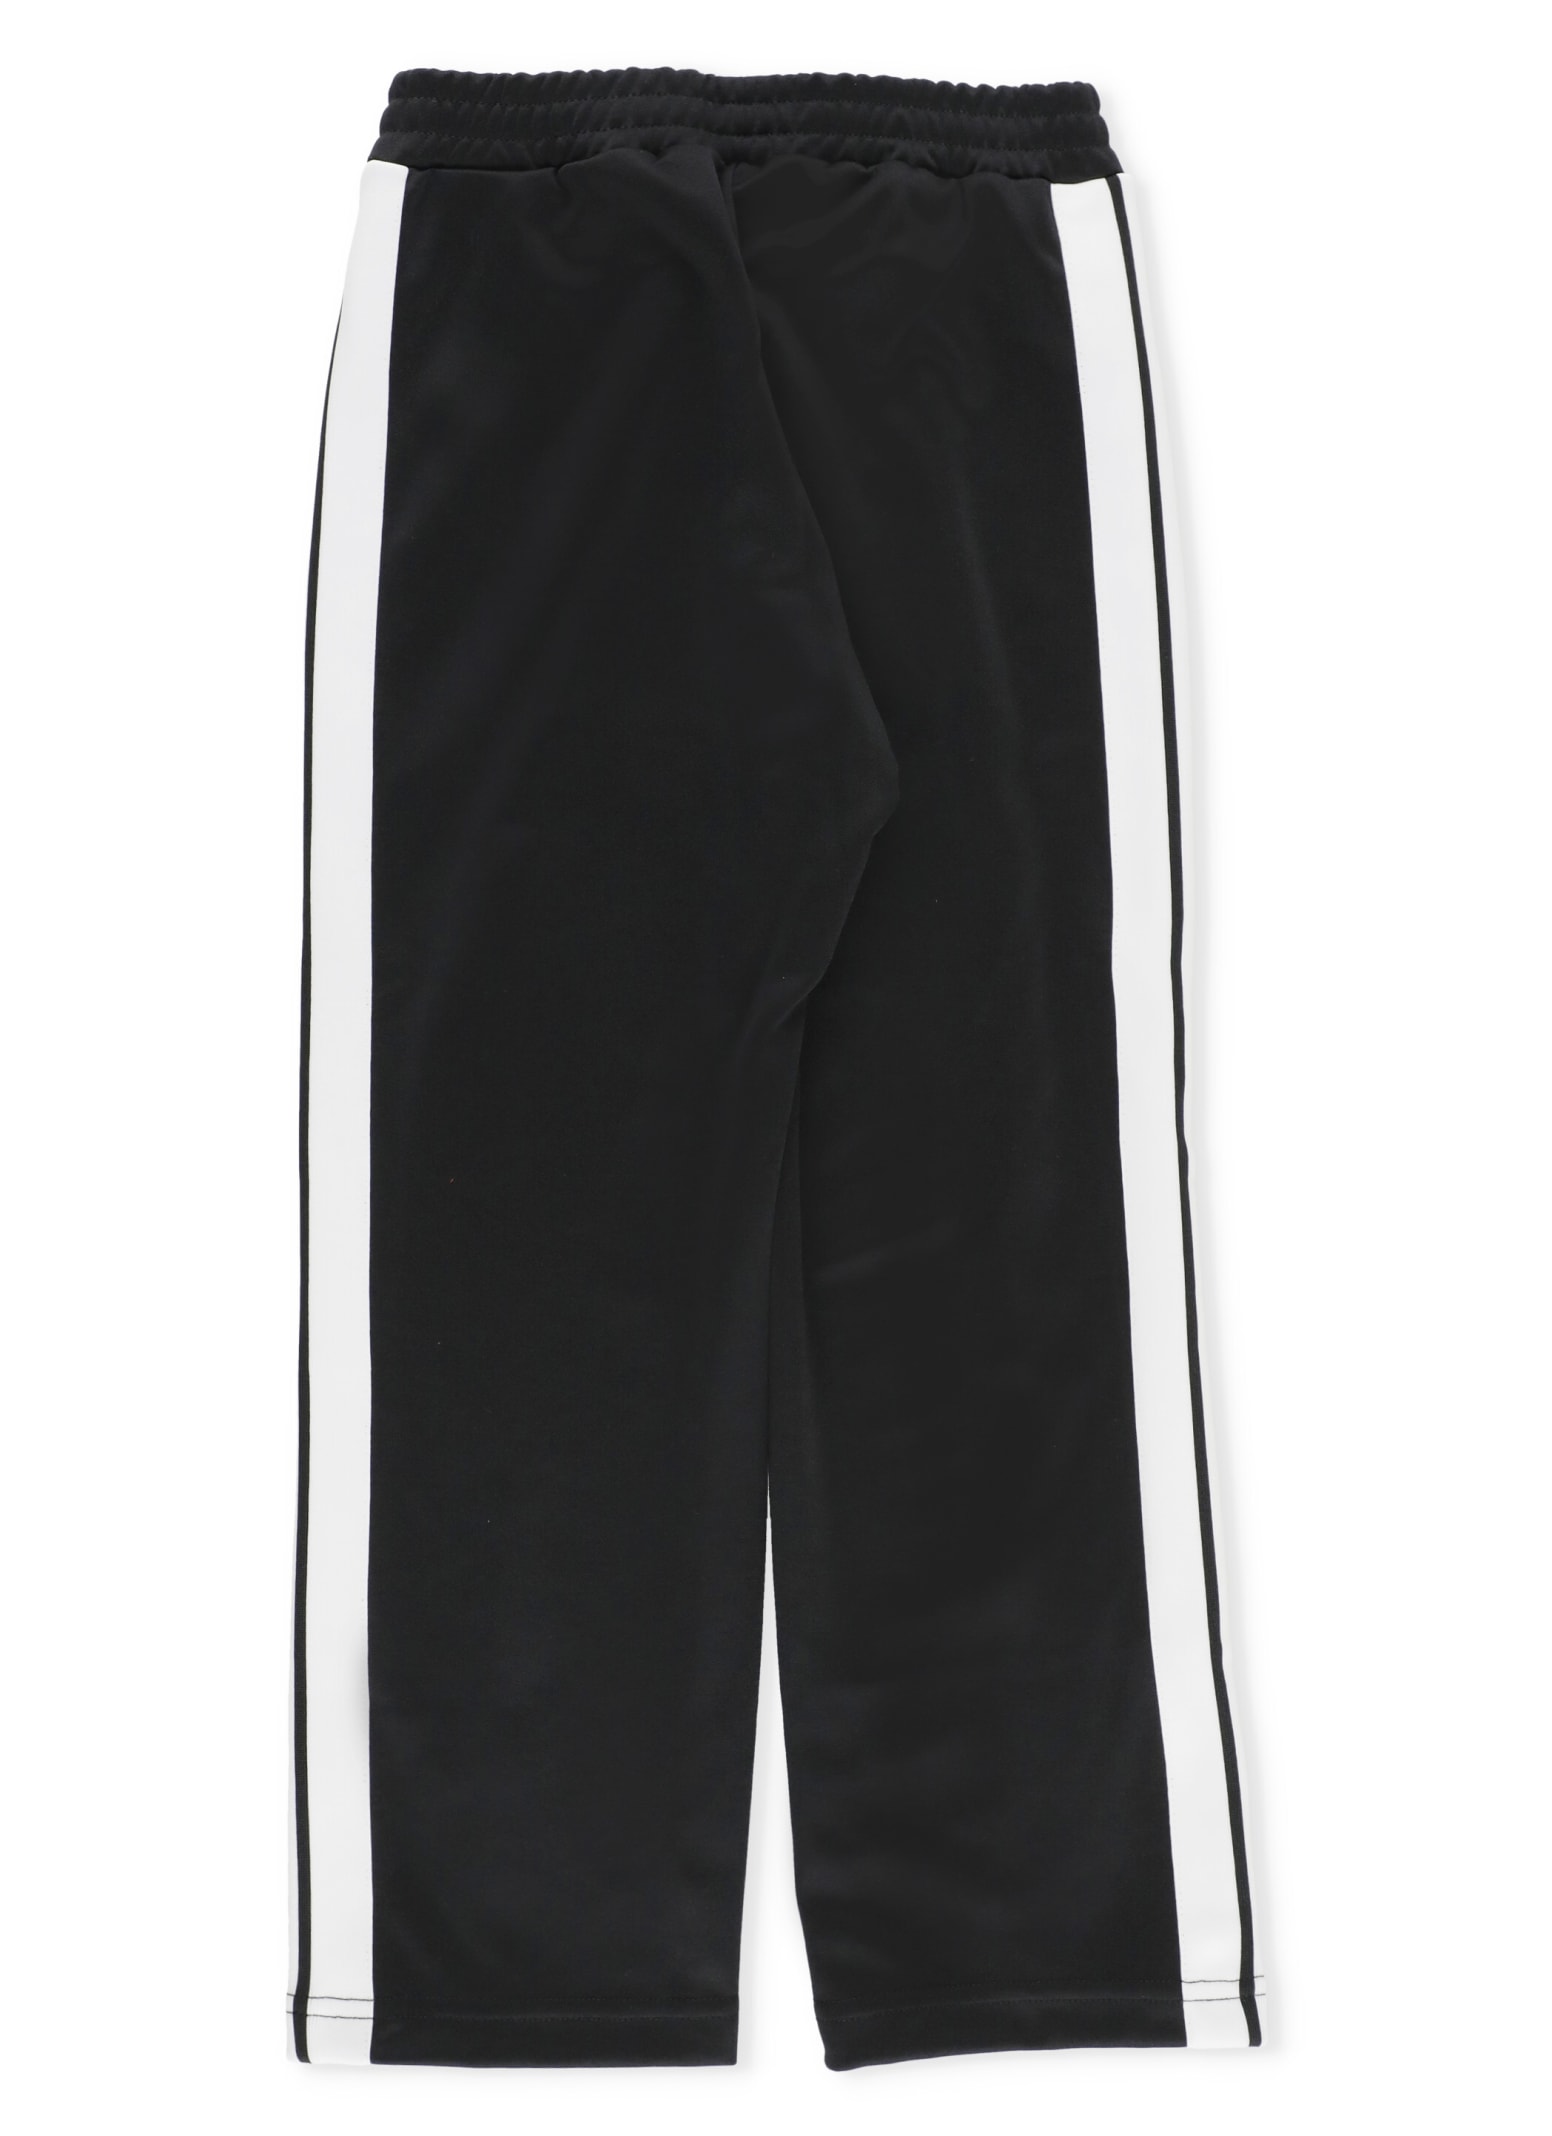 Shop Palm Angels Sweatpants With Logo In Black